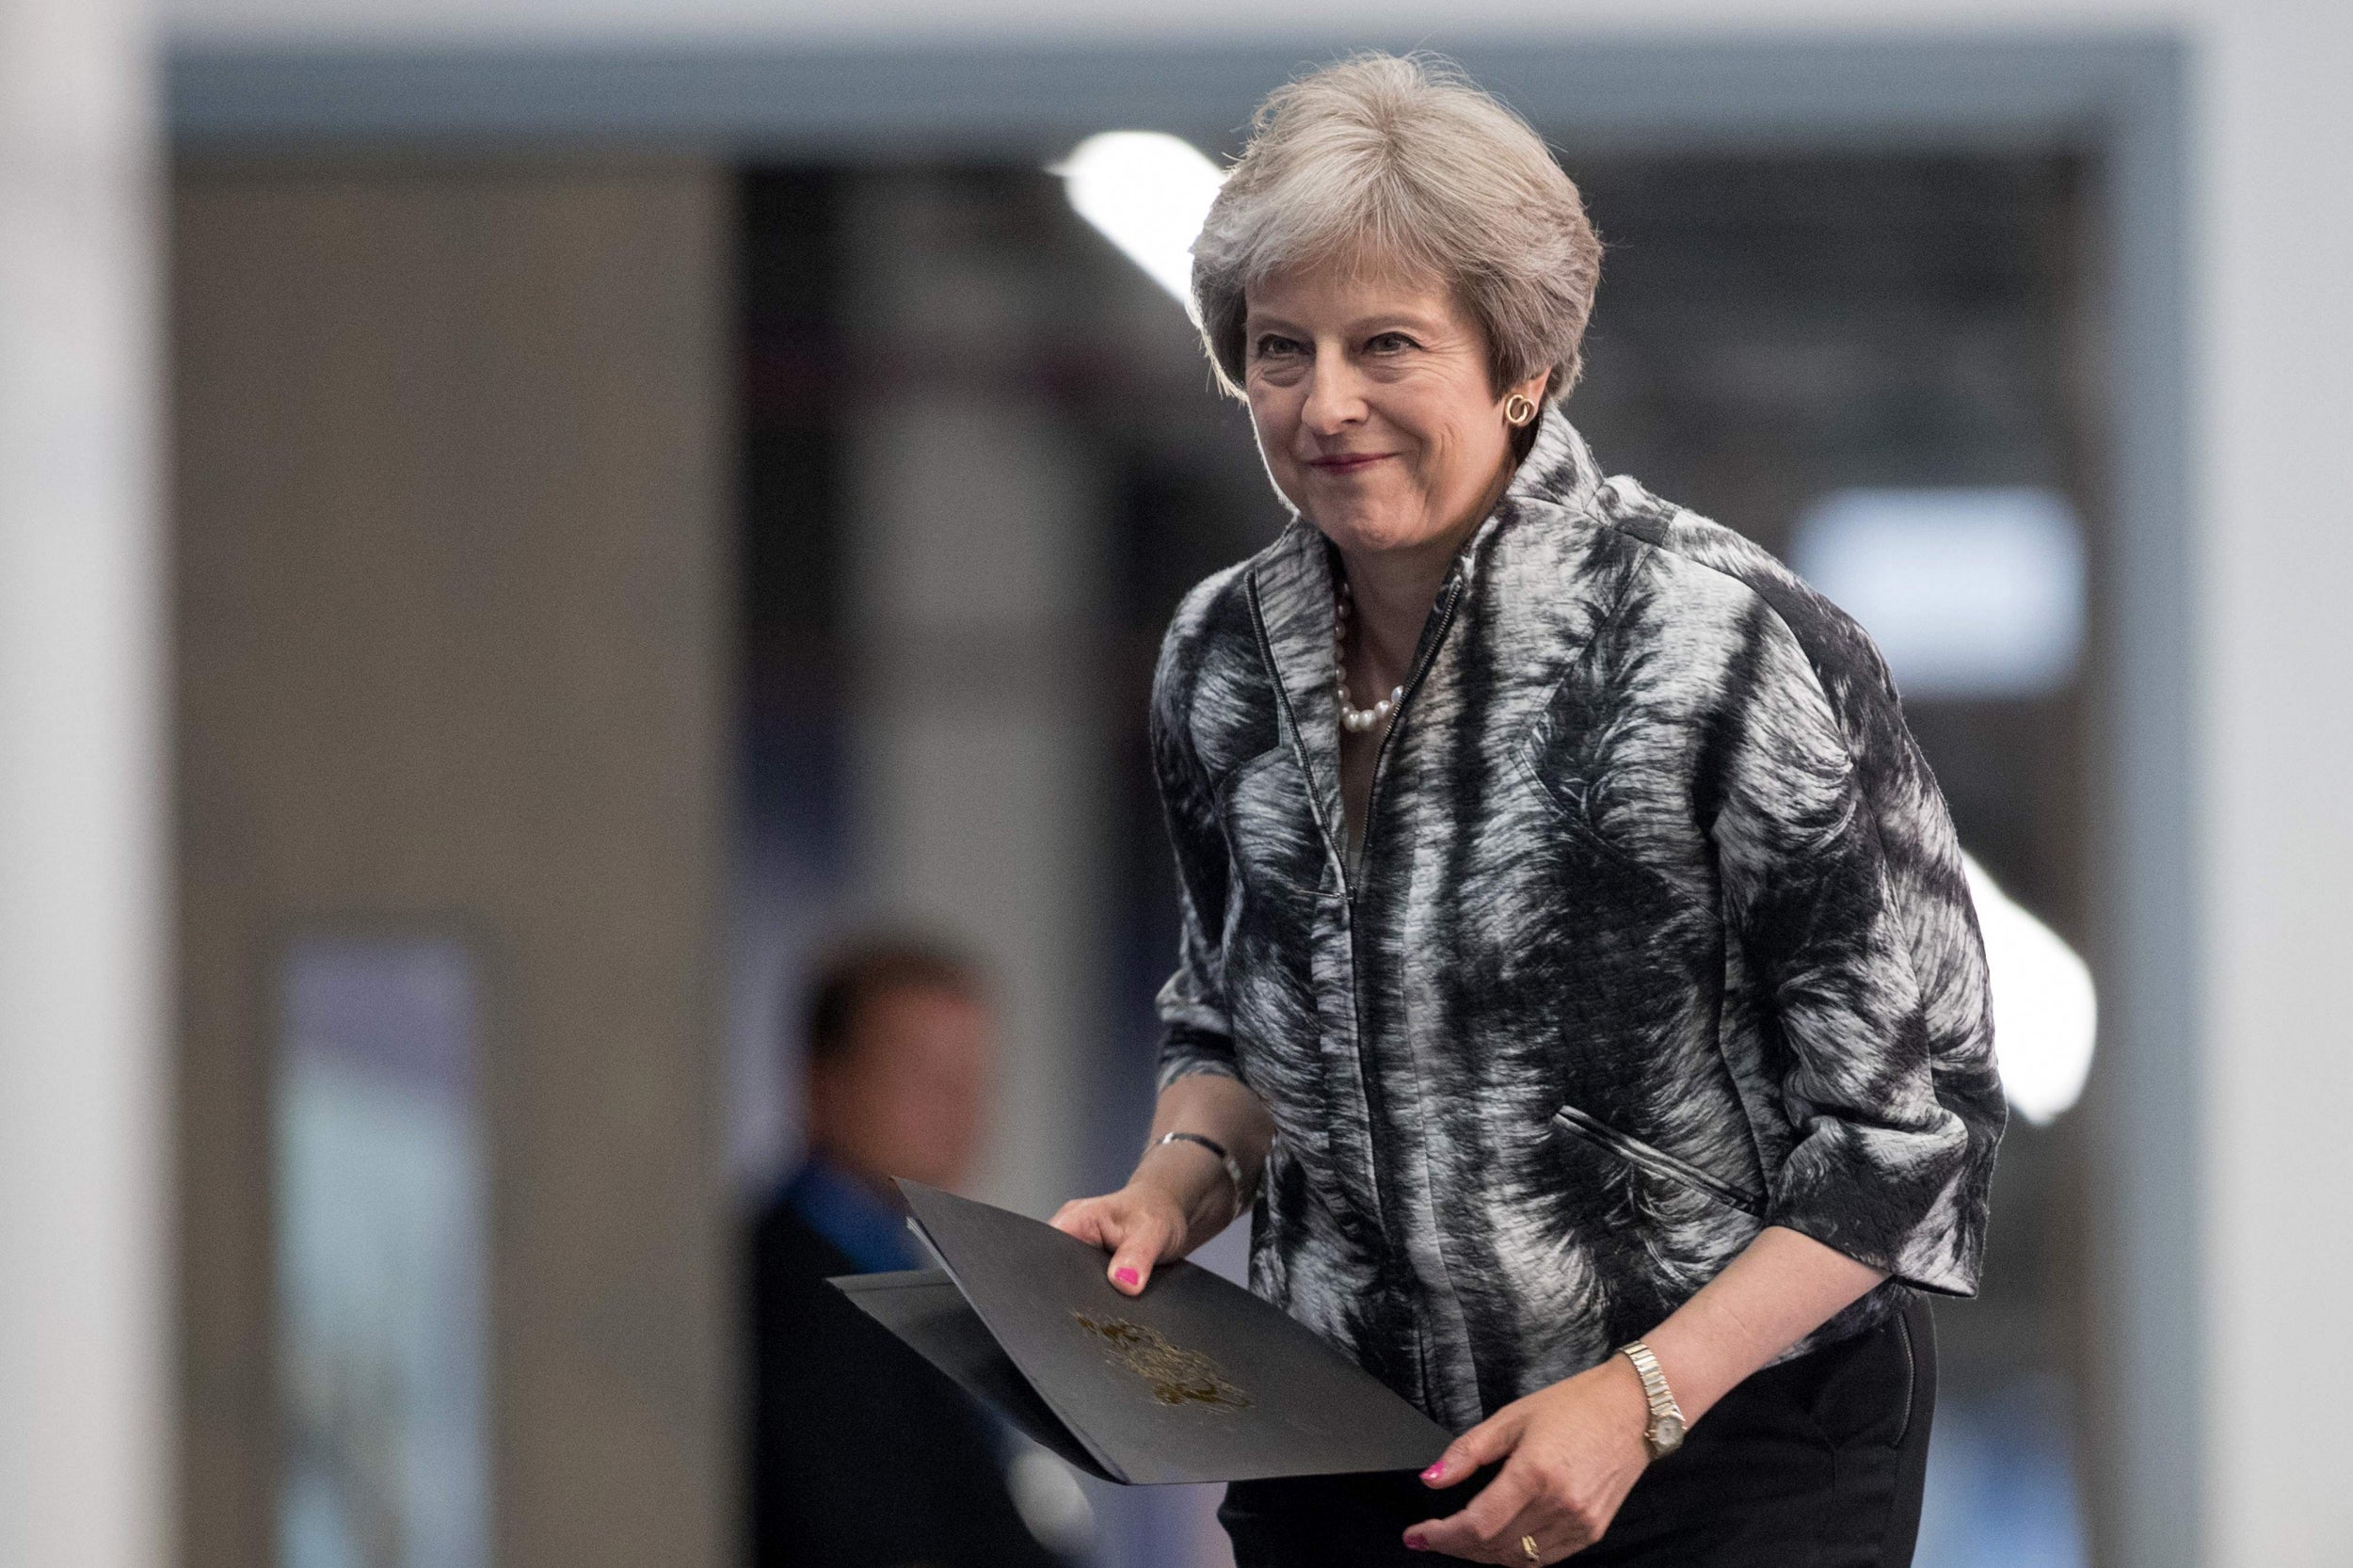 Brexit - LIVE: Theresa May survives customs vote humiliation by six votes despite Tory rebellion